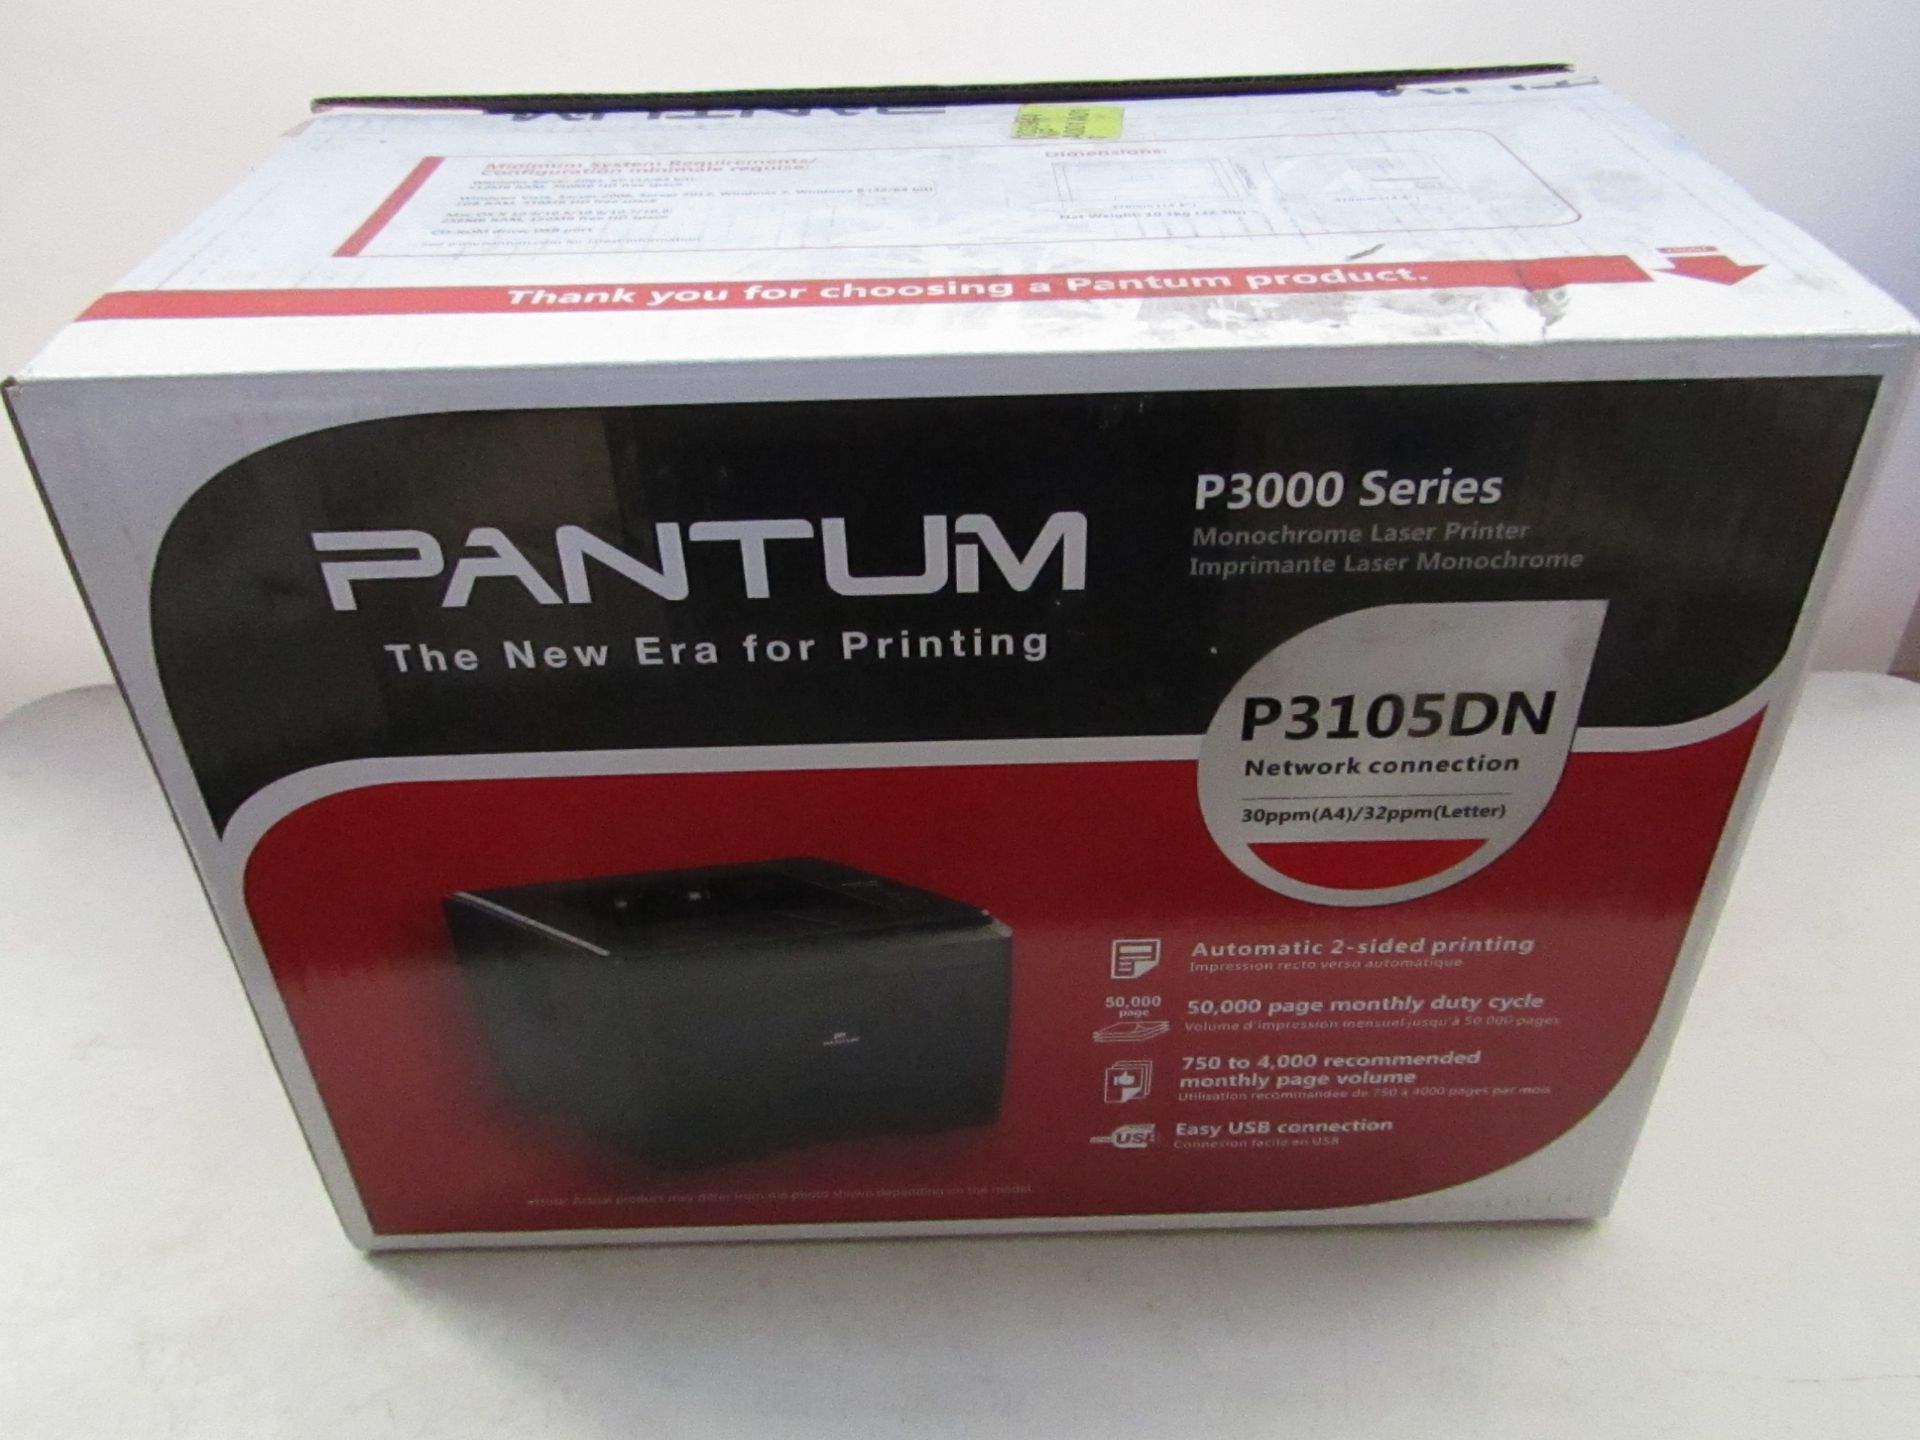 Pantum p3000 series monochrome laser printer, new and boxed.